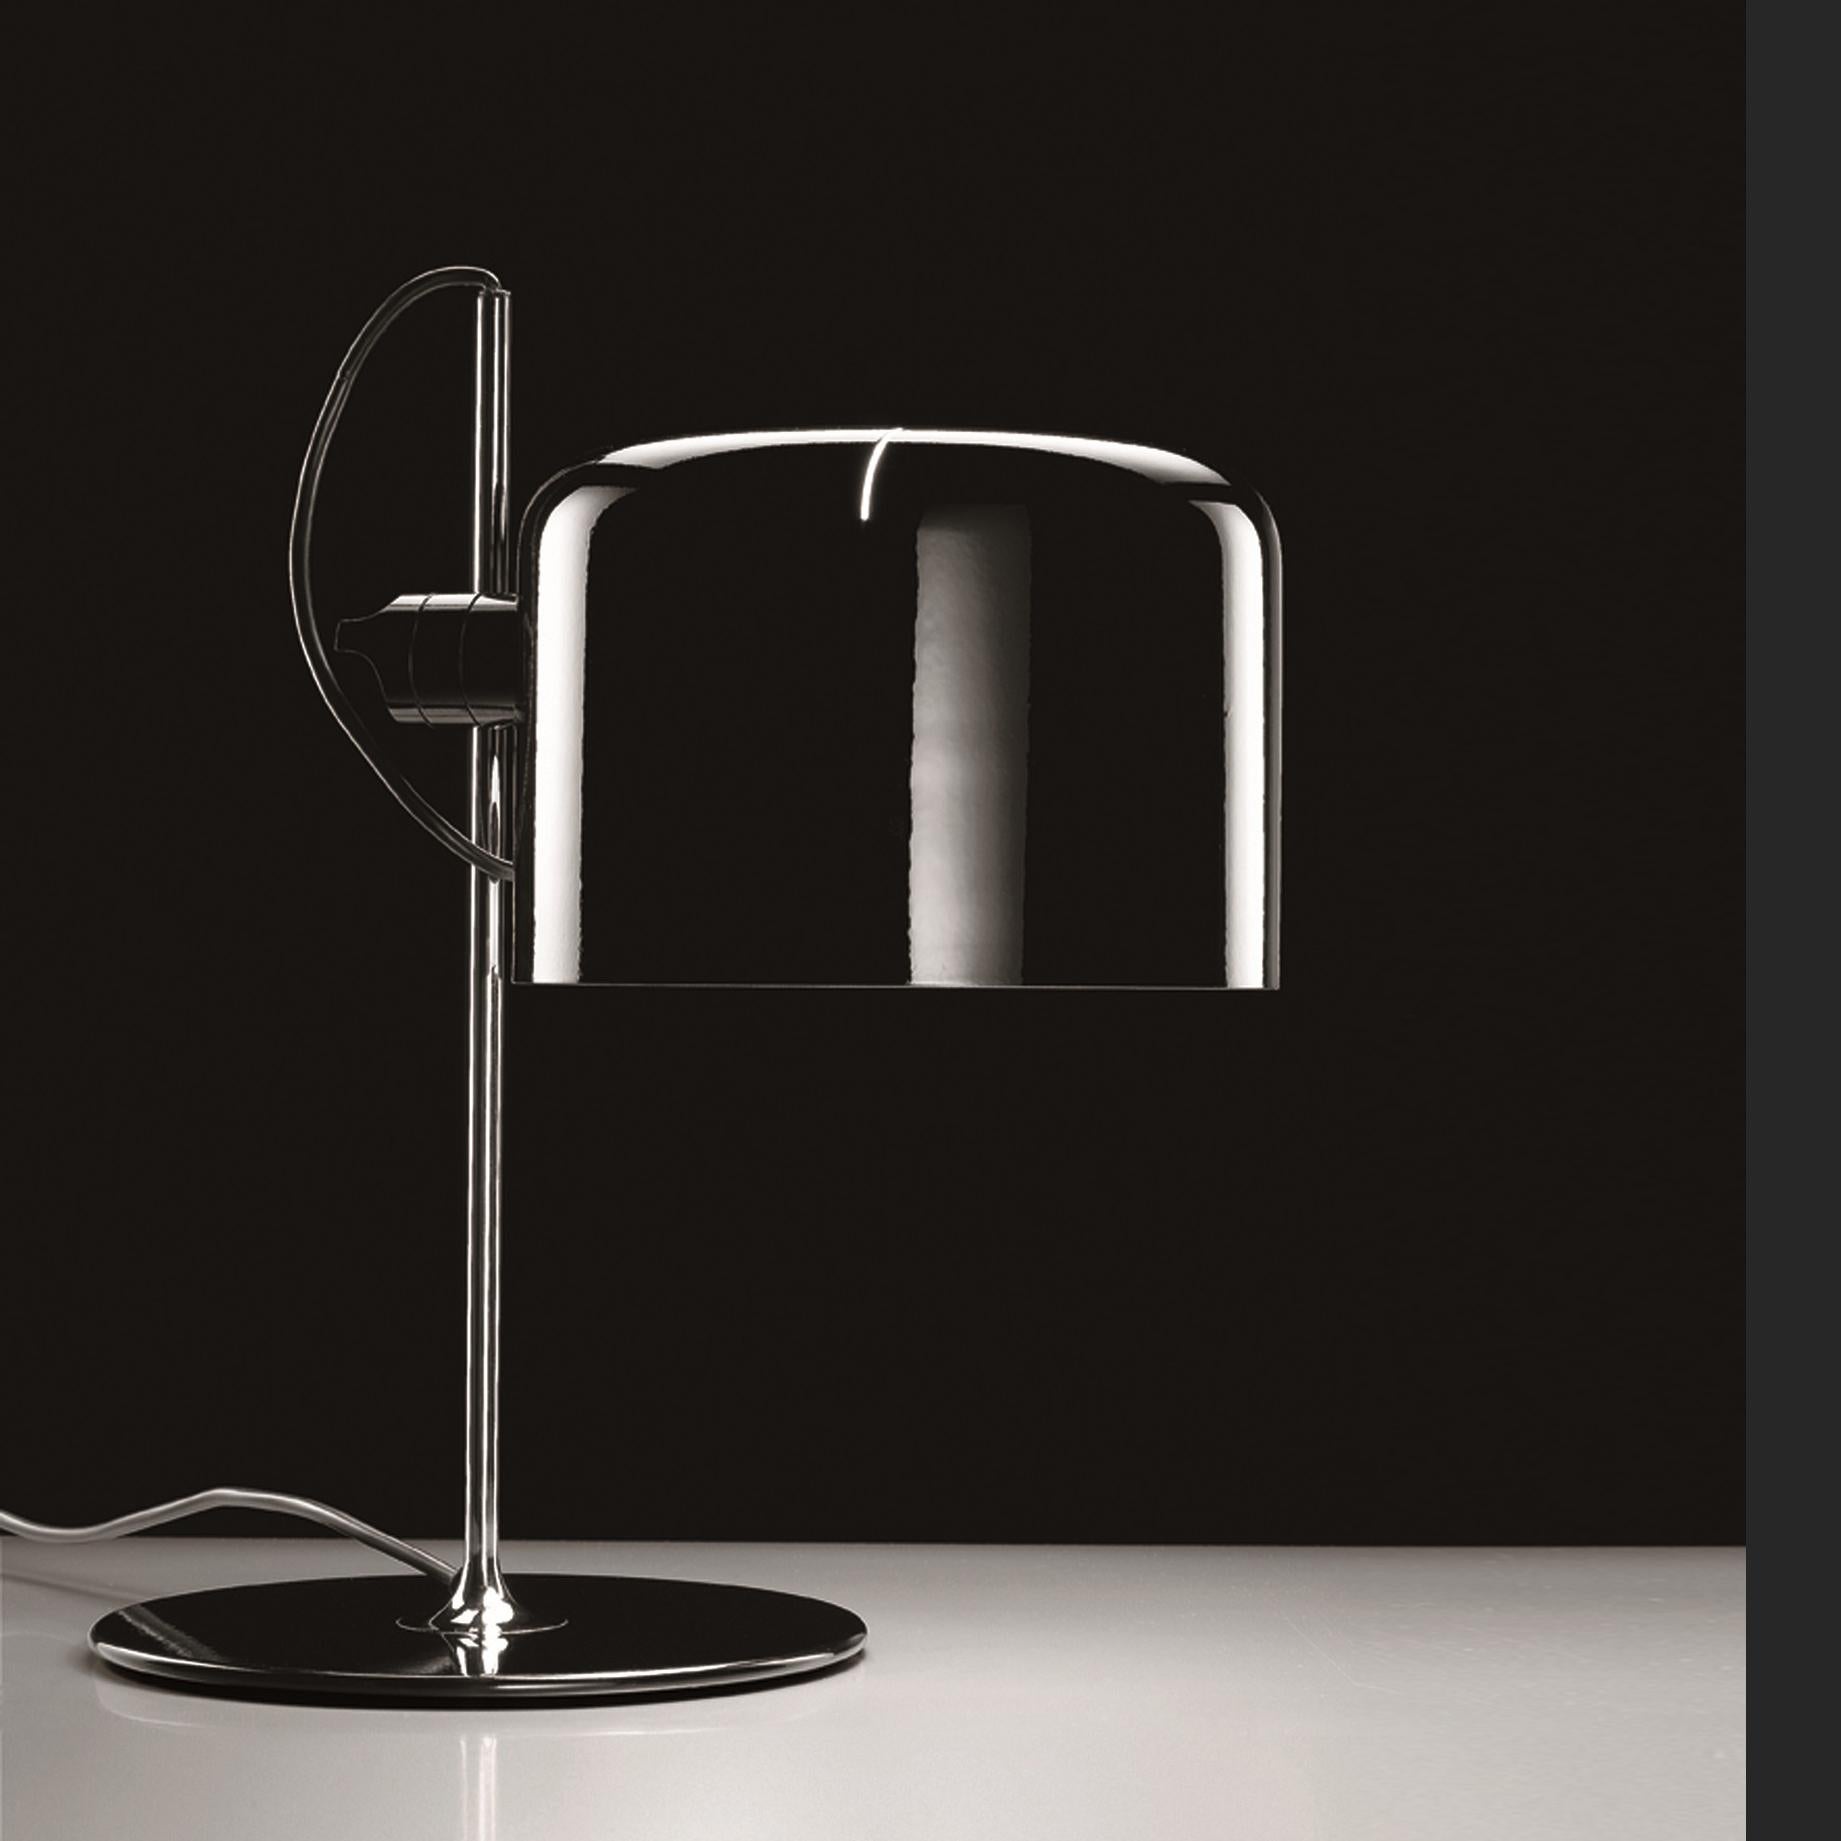 Table lamp 'Coupé' designed by Joe Colombo in 1967.
Table lamp giving direct light, lacquered metal base, chromium-plated stem, adjustable reflector in lacquered aluminium.
Manufactured by Oluce, Italy.

The Coupé series, designed by Joe Colombo,